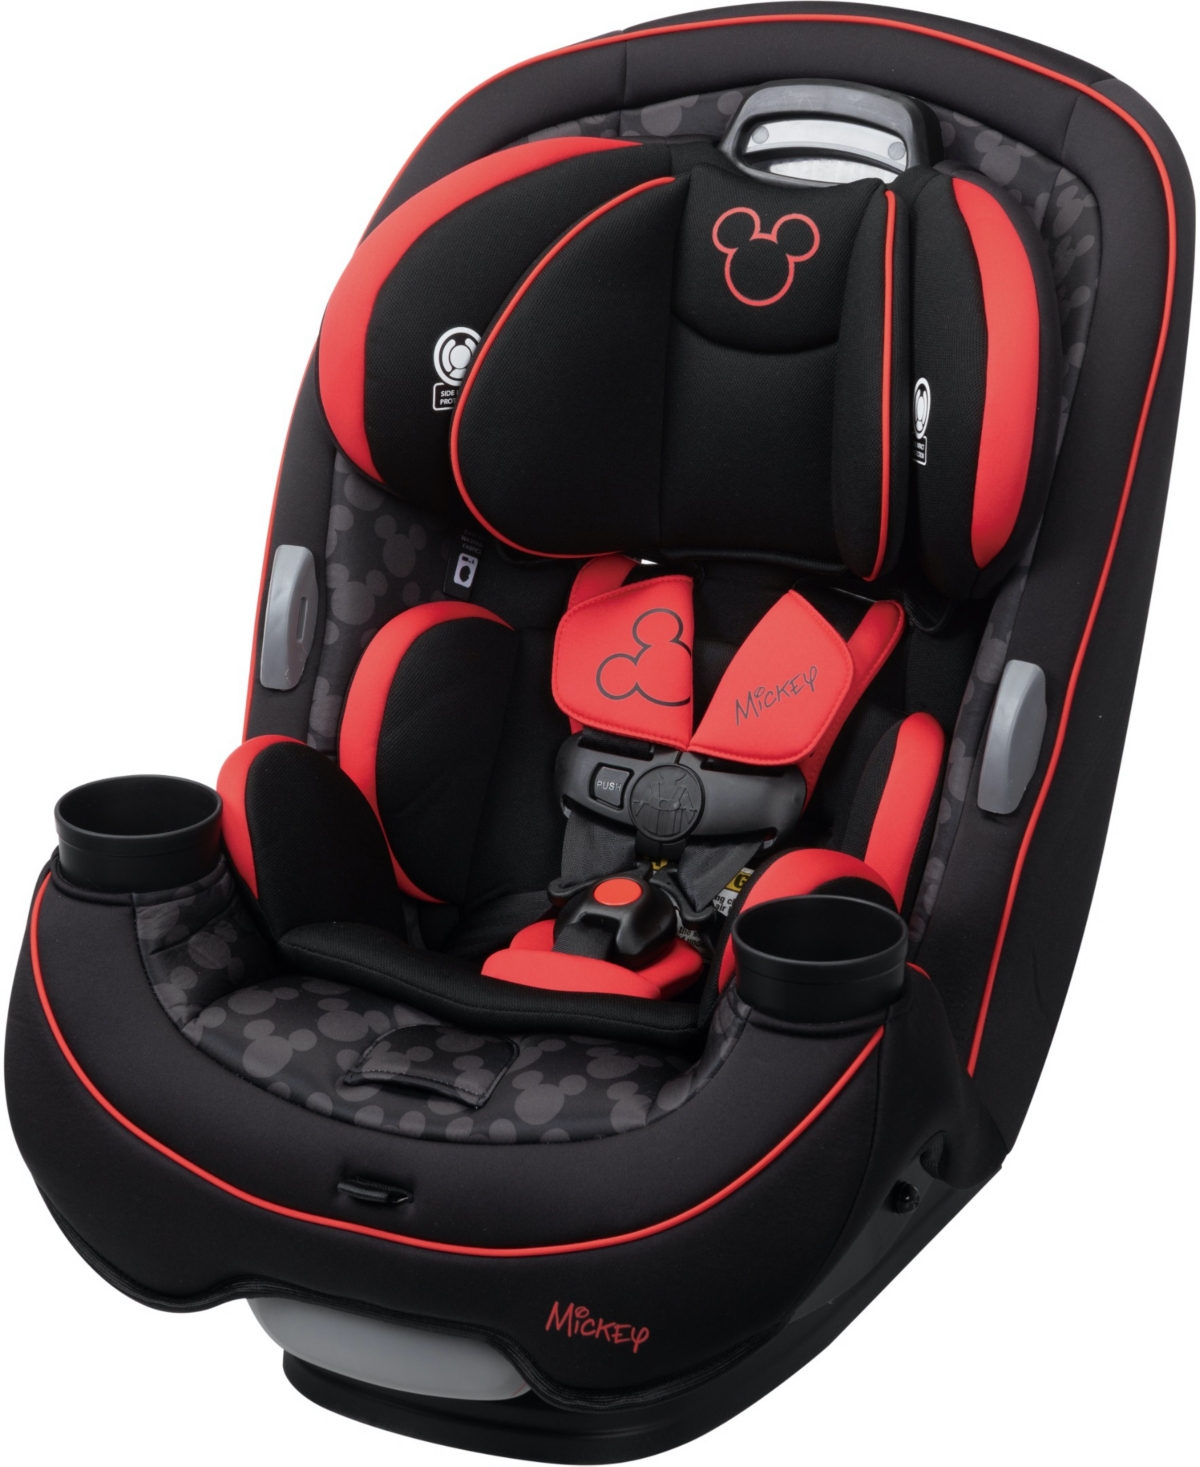 Disney Baby Grow And Go 3-in-1 Convertible One-hand Adjust Car Seat In Simply Mickey